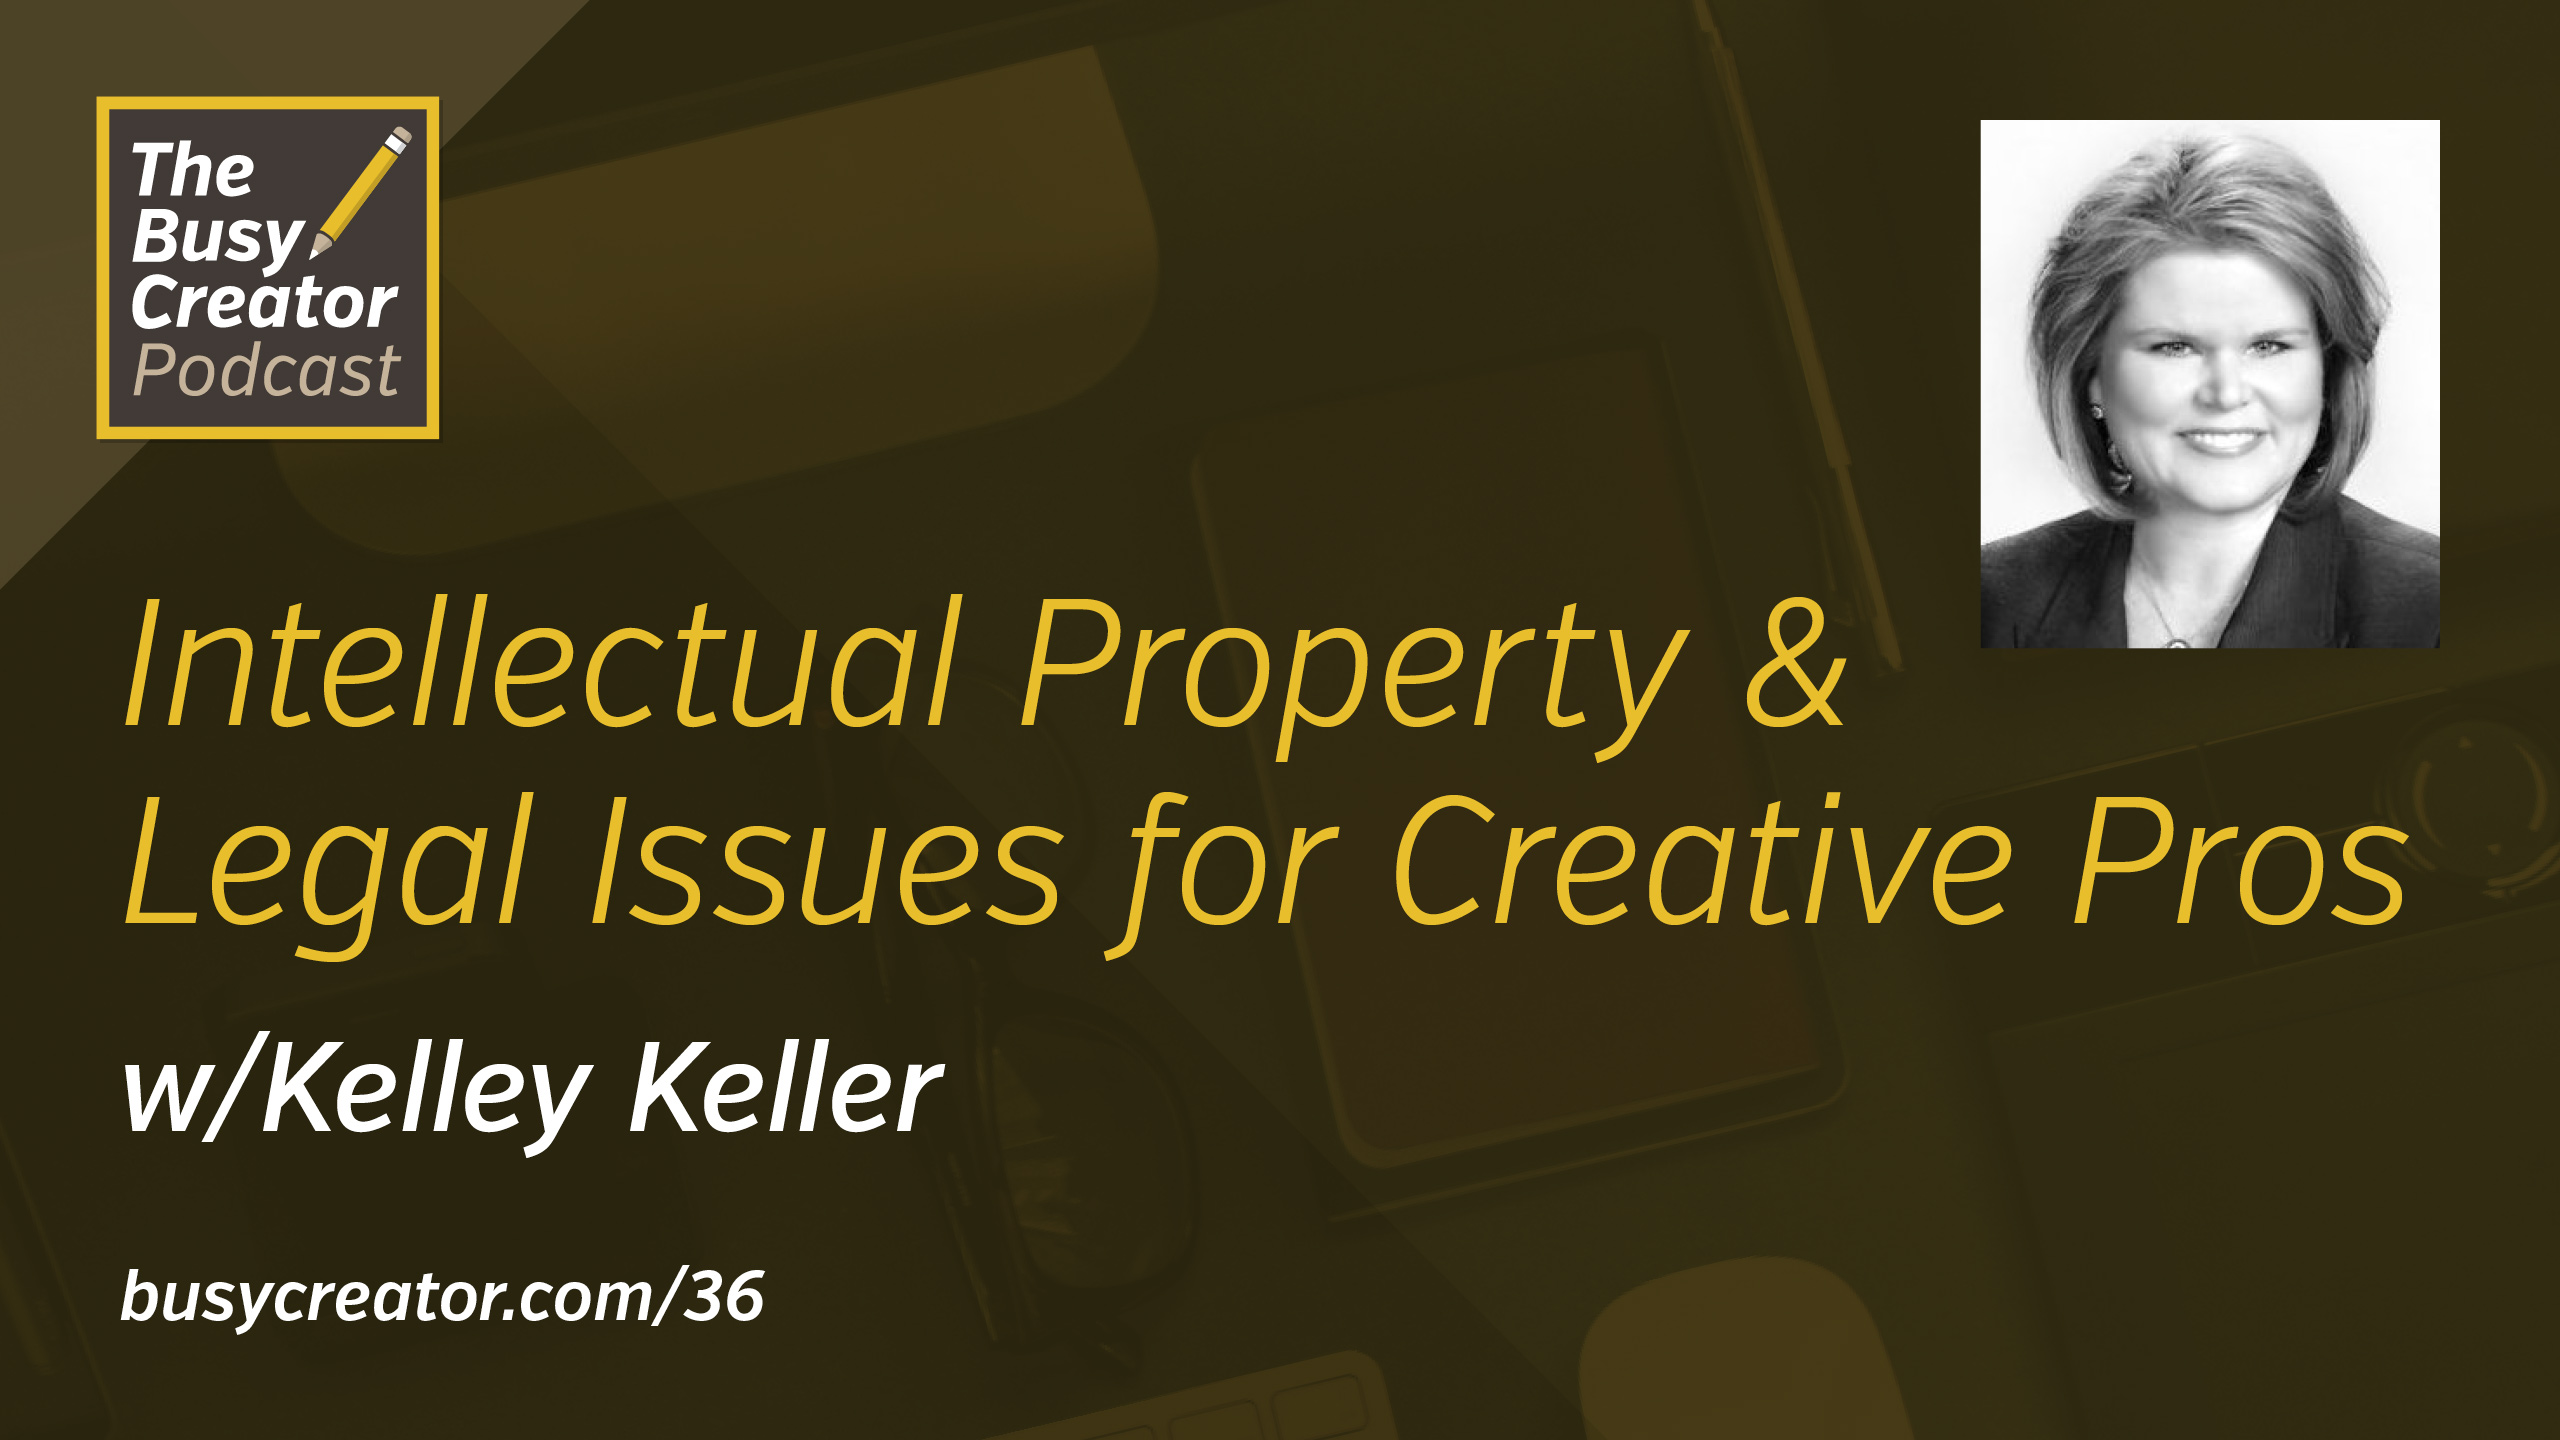 Intellectual Property & Legal Issues for Creative Pros with Attorney & Educator Kelley Keller